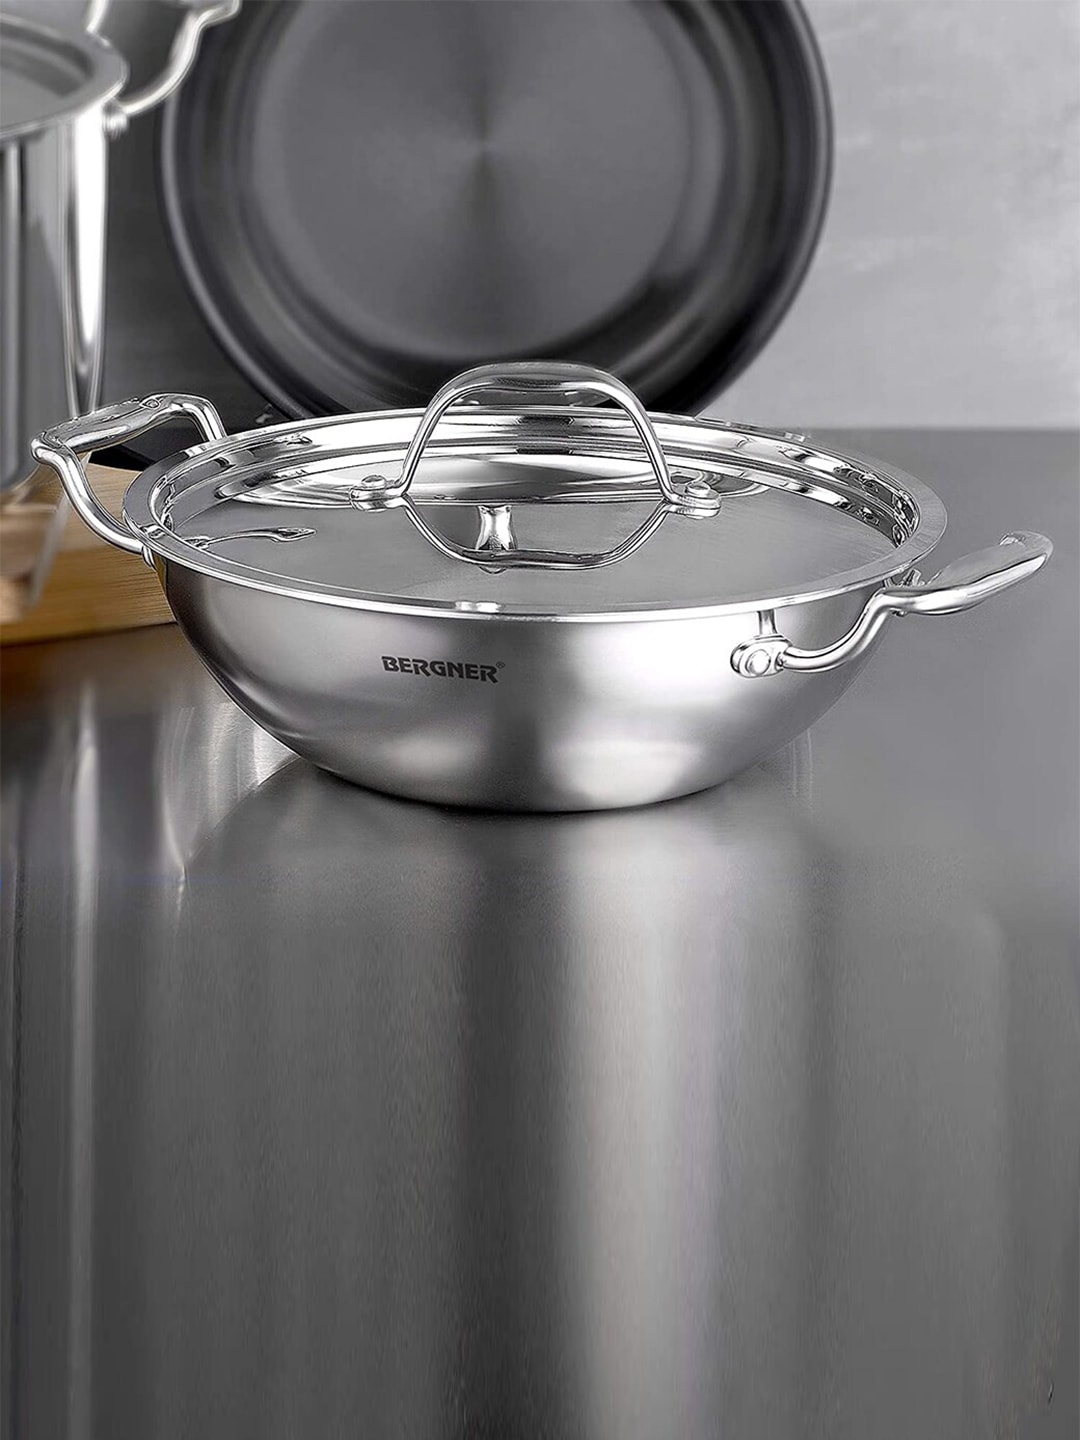 BERGNER Silver-Toned Stainless Steel Kadai With Lid Price in India